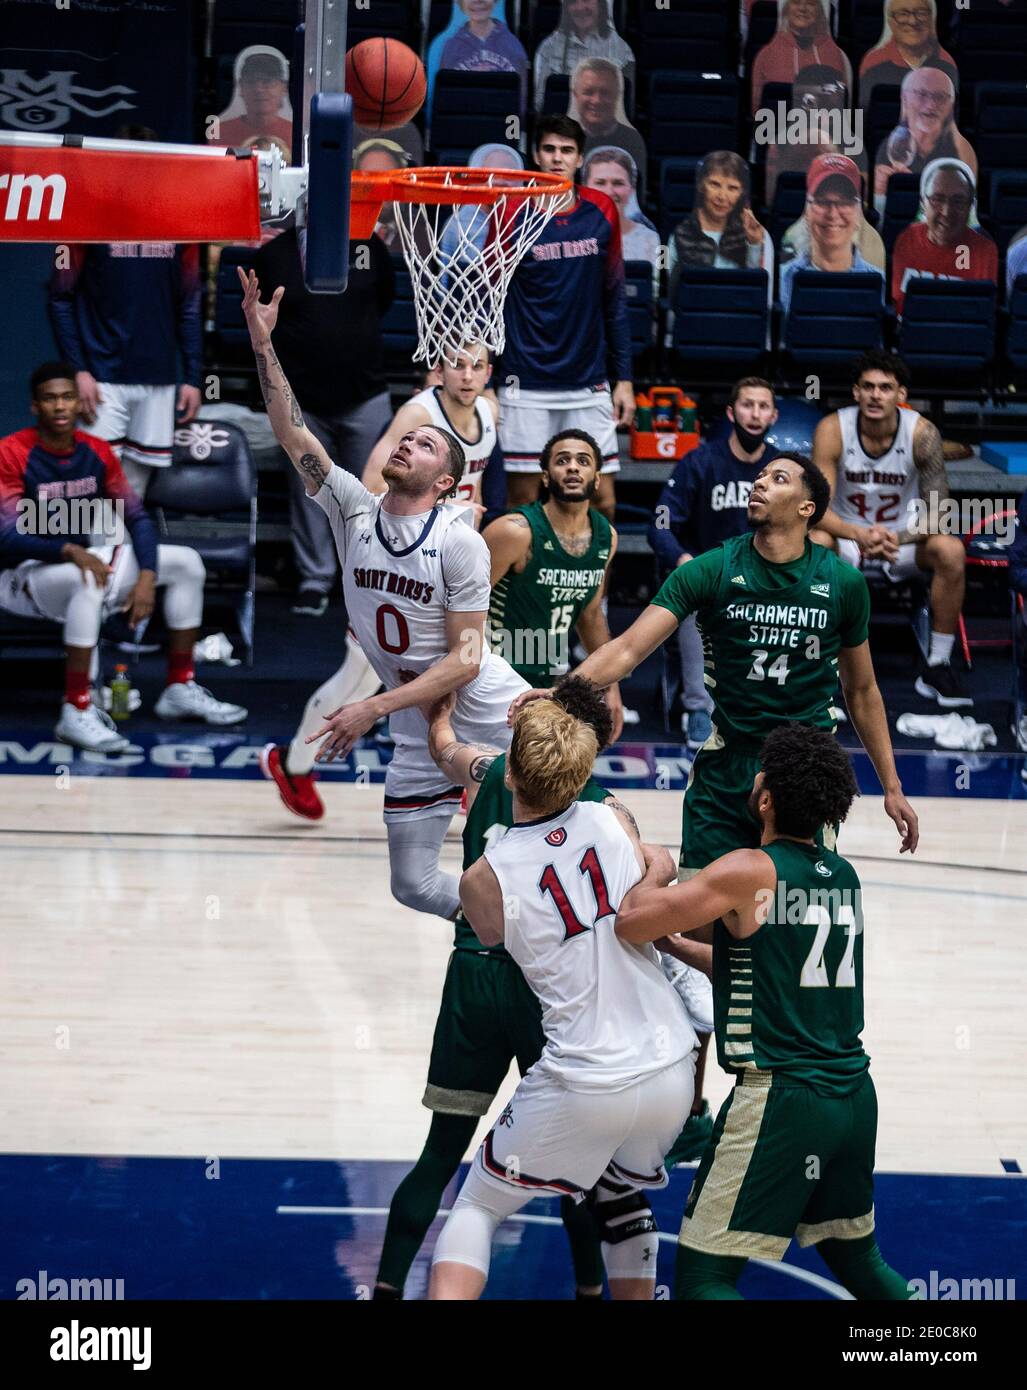 Moraga, CA U.S. 30th Dec, 2020. A. St. Mary's Gaels guard Logan Johnson (0) drives to the hoop during the NCAA Men's Basketball game between Sacramento State Hornets and the Saint Mary's Gaels 63-45 win at McKeon Pavilion Moraga Calif. Thurman James/CSM/Alamy Live News Stock Photo